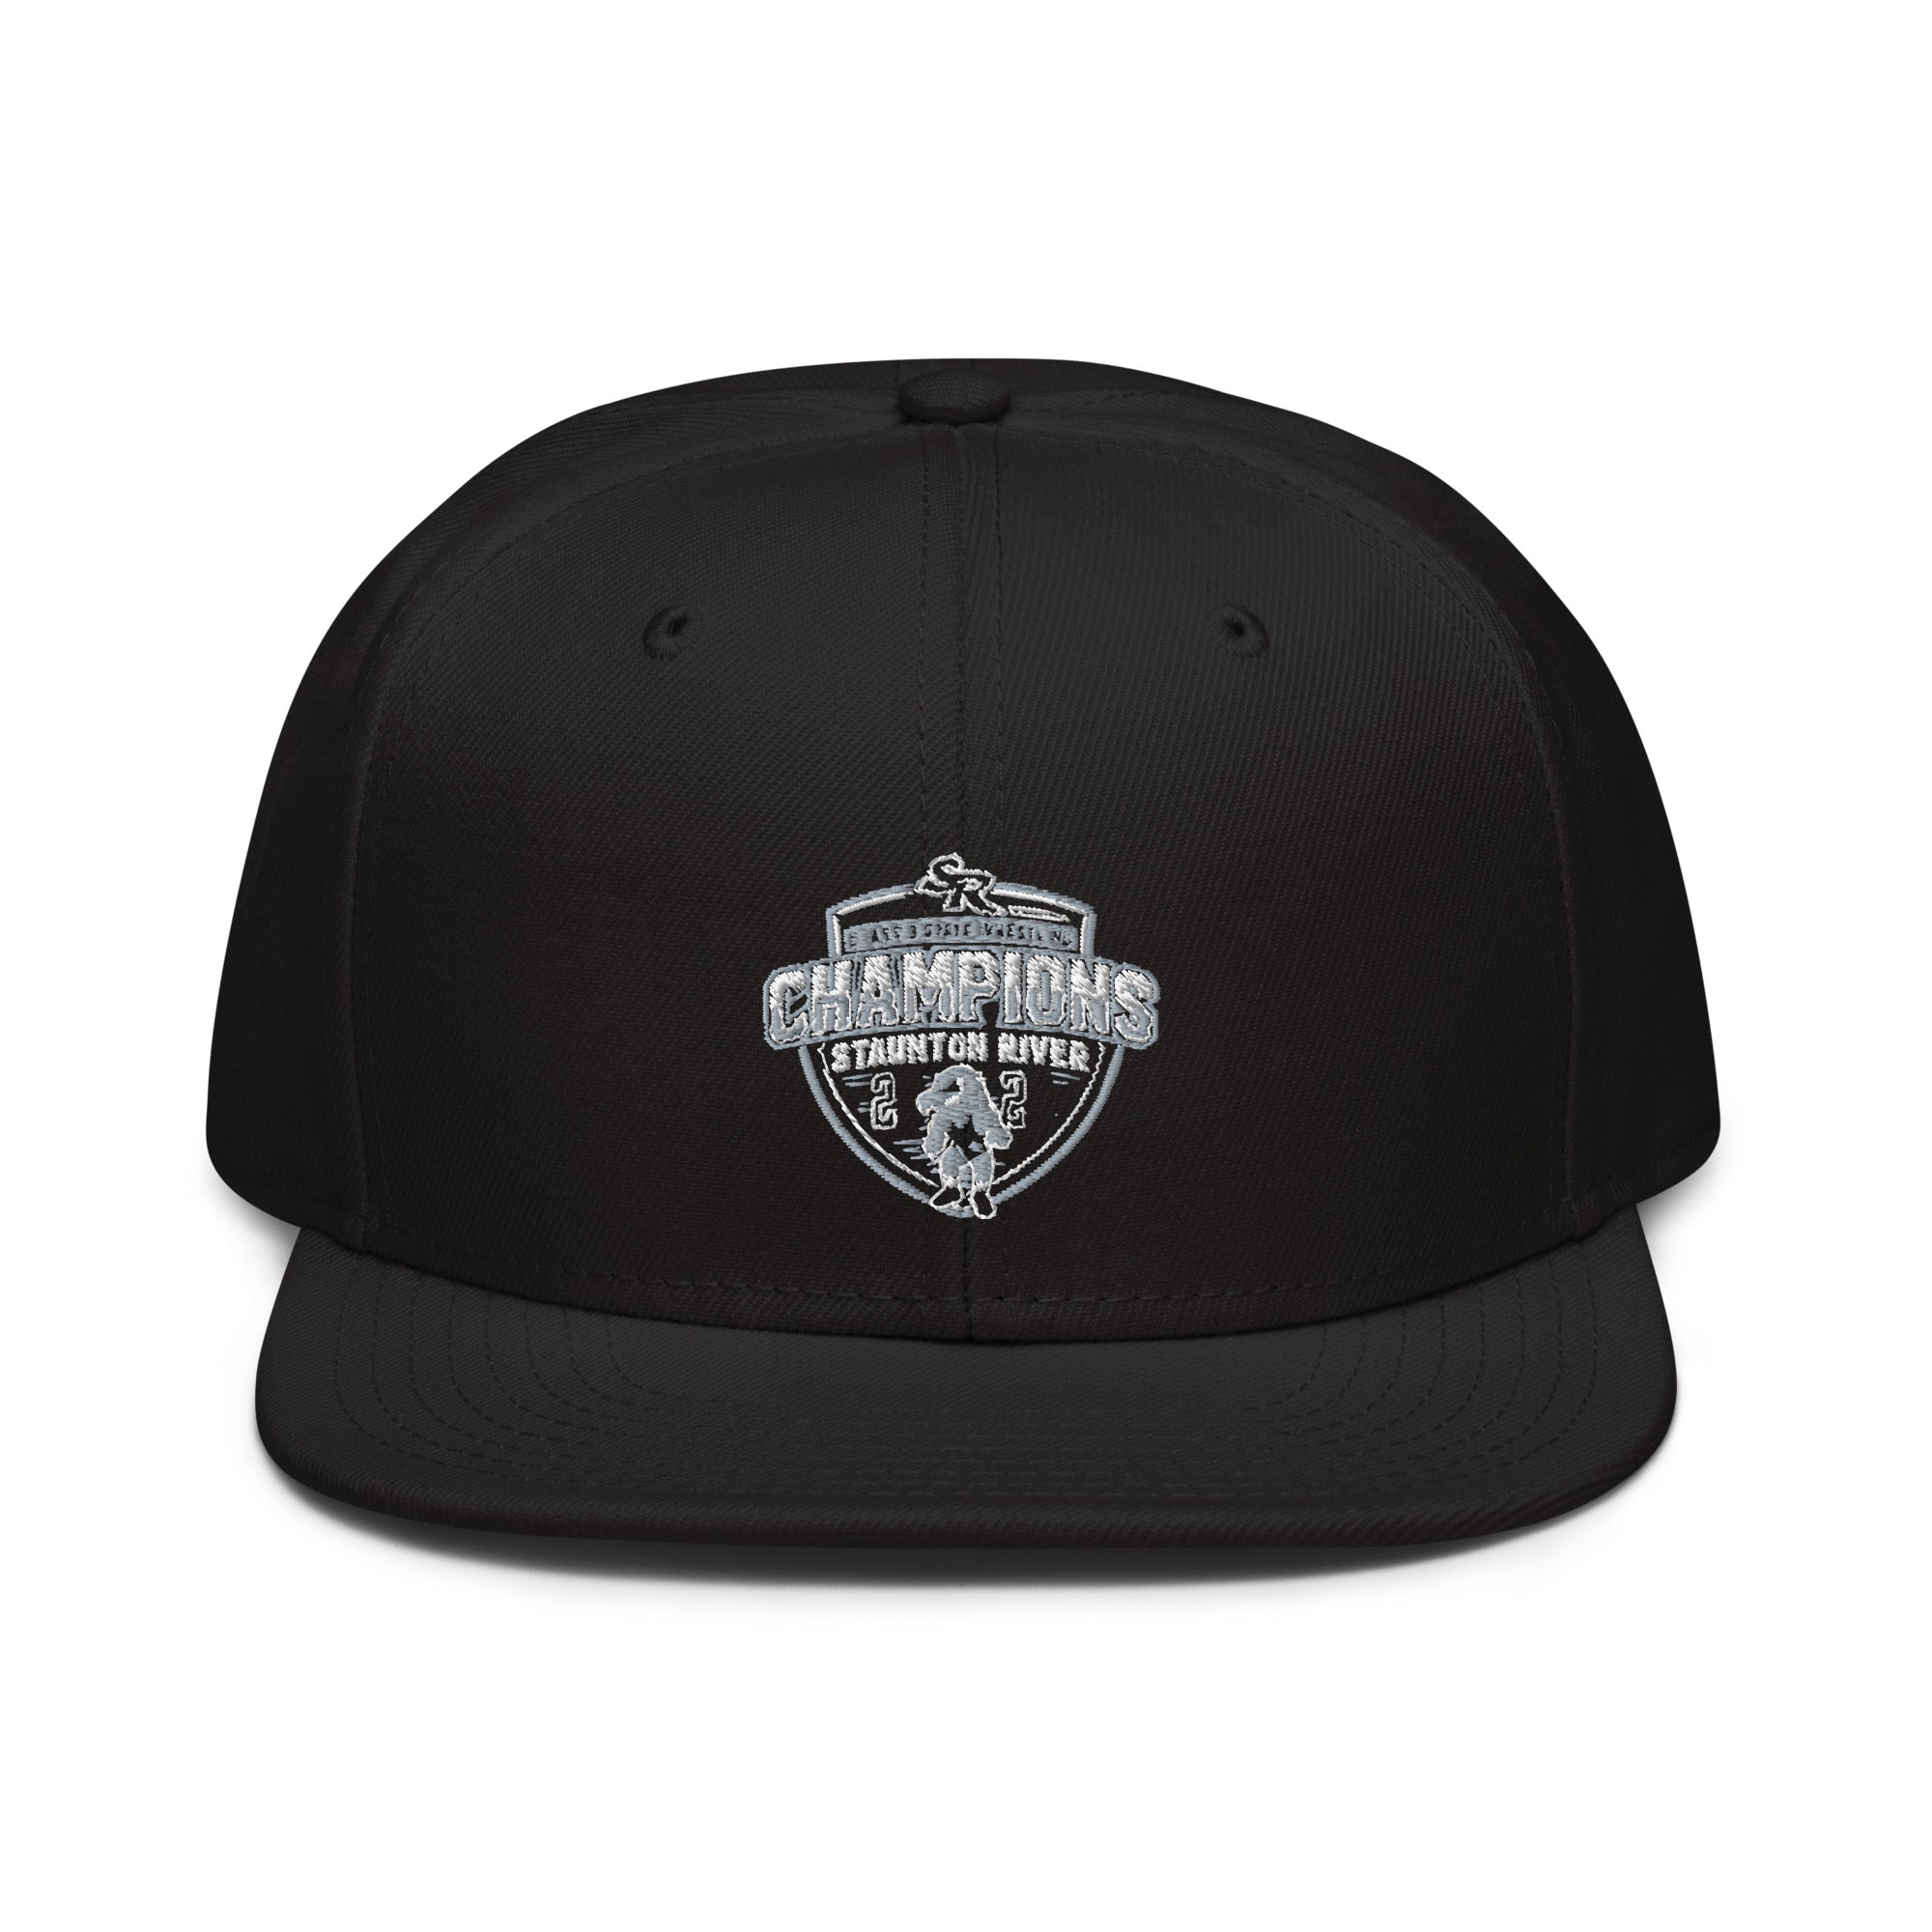 Staunton River State Champs Snapback Hat